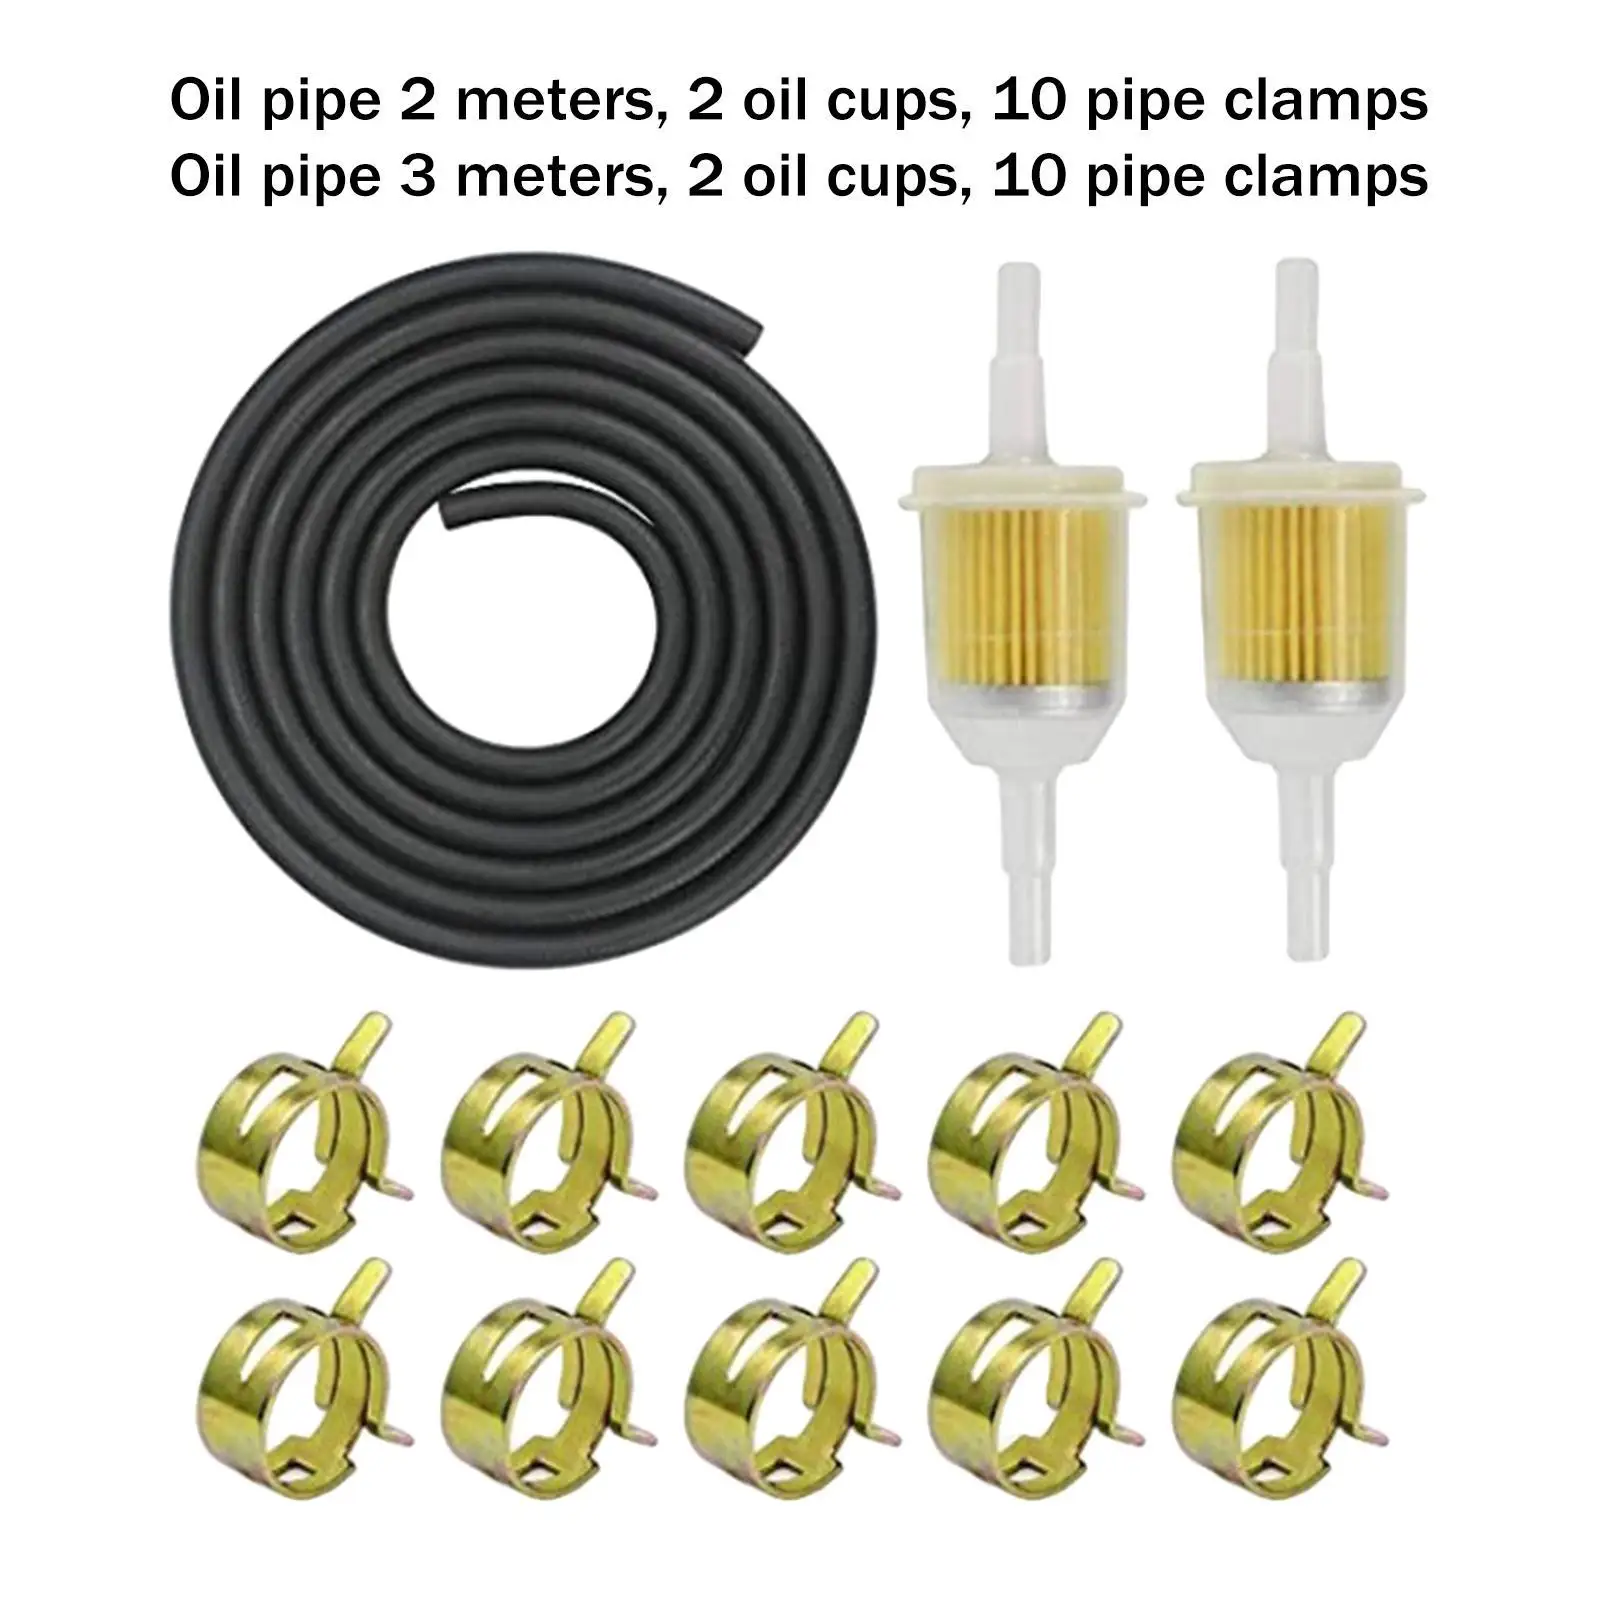 Fuel Line Hose Kit 2pc 8mm Oil Filters 10pc Hose Clamps for Lawn Mowers Snowmobiles Motorcycles